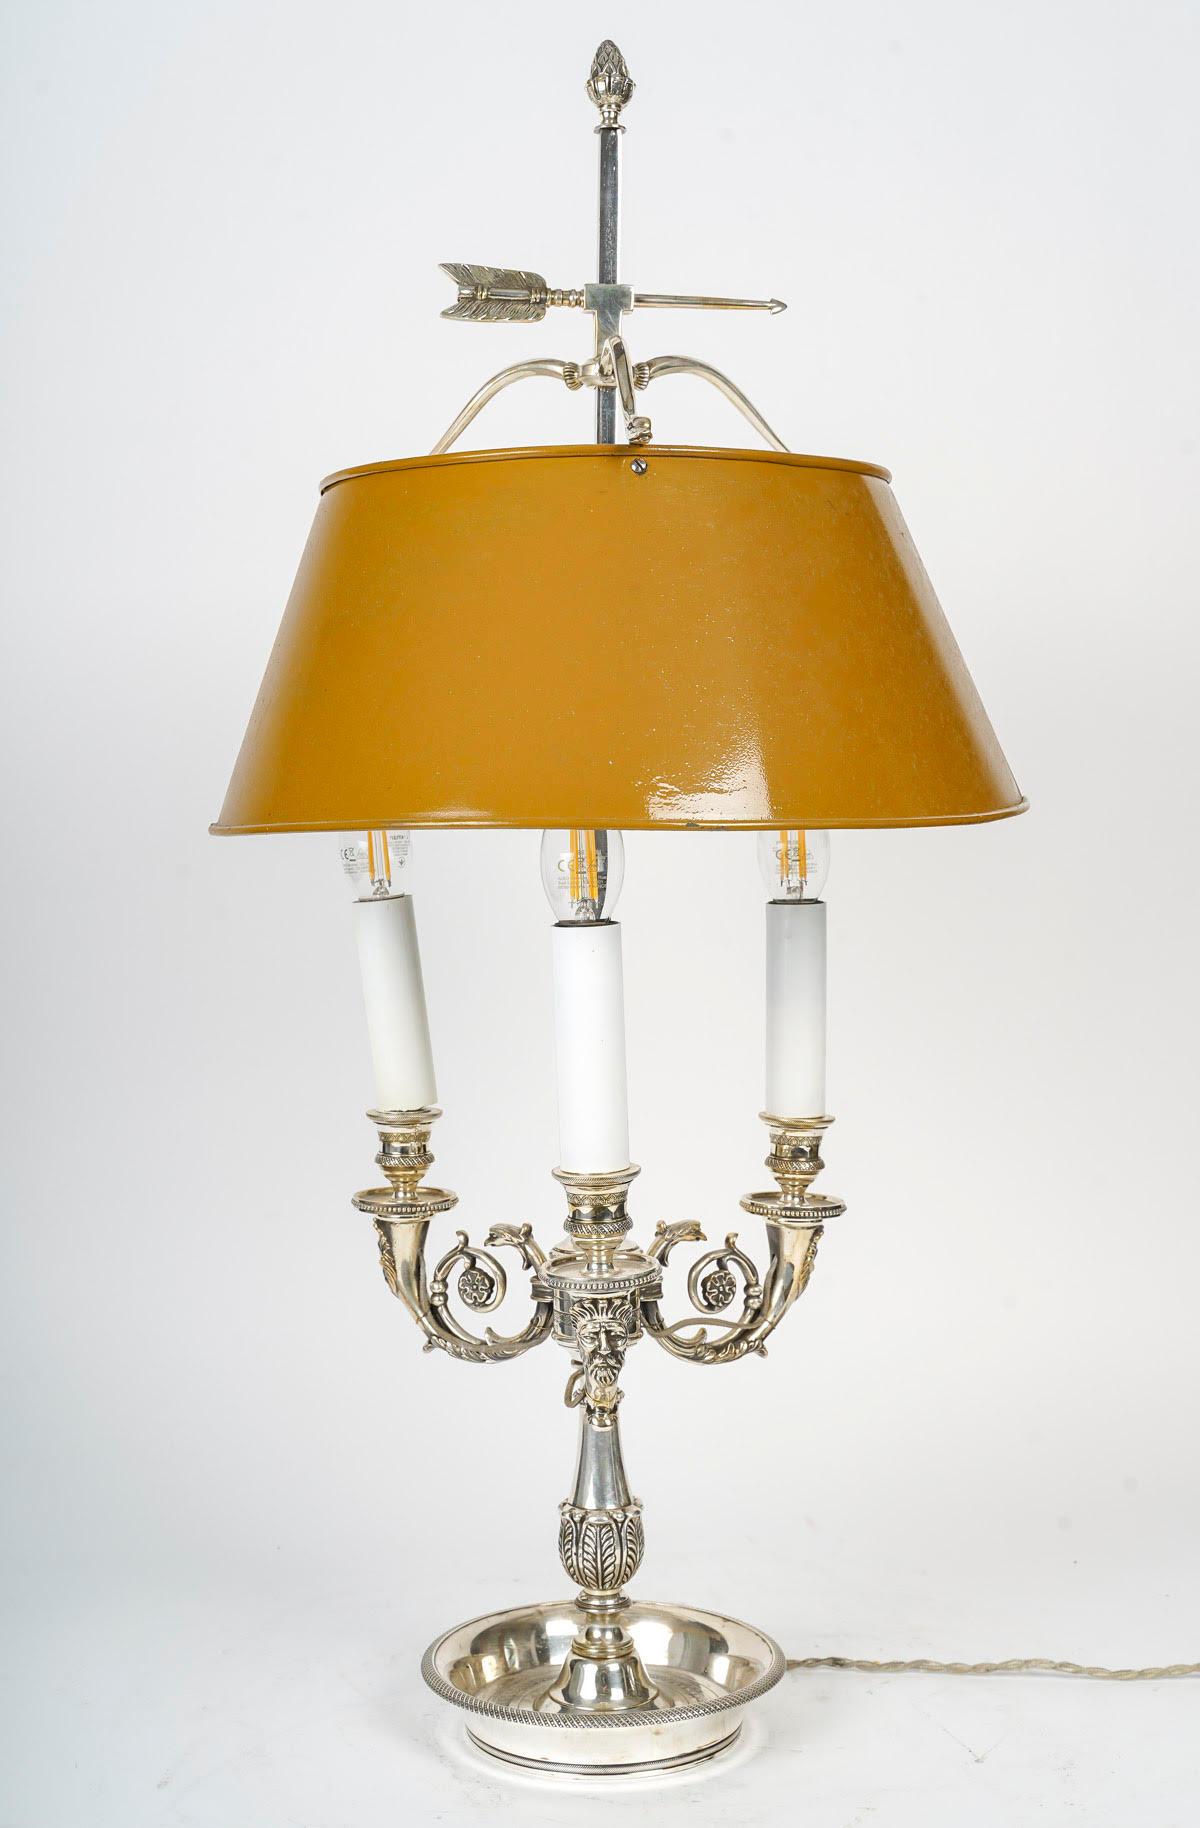 Metal Large Bouillotte Lamp in Silver Plated Bronze, 19th Century, Napoleon III Period For Sale